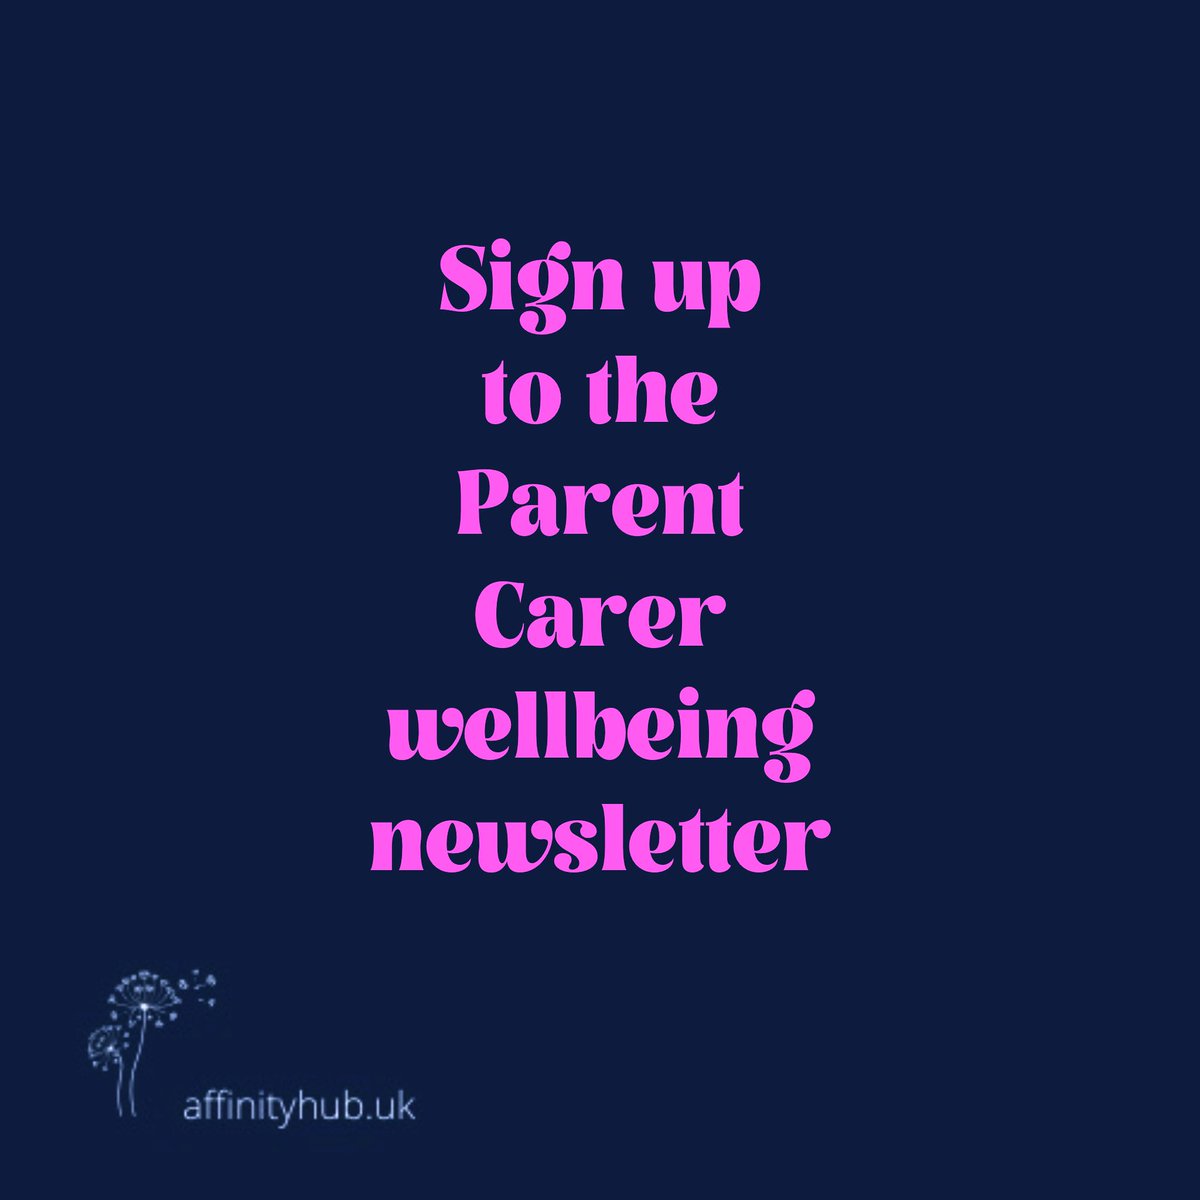 Professionals with an interest in the psychological wellbeing of parents of disabled children - sign up to info & research quarterly newsletter here: bitly.ws/Q2wR #parentcarers and #specialneedsparents can sign up too #parentcarerwellbeing Affinityhub.uk